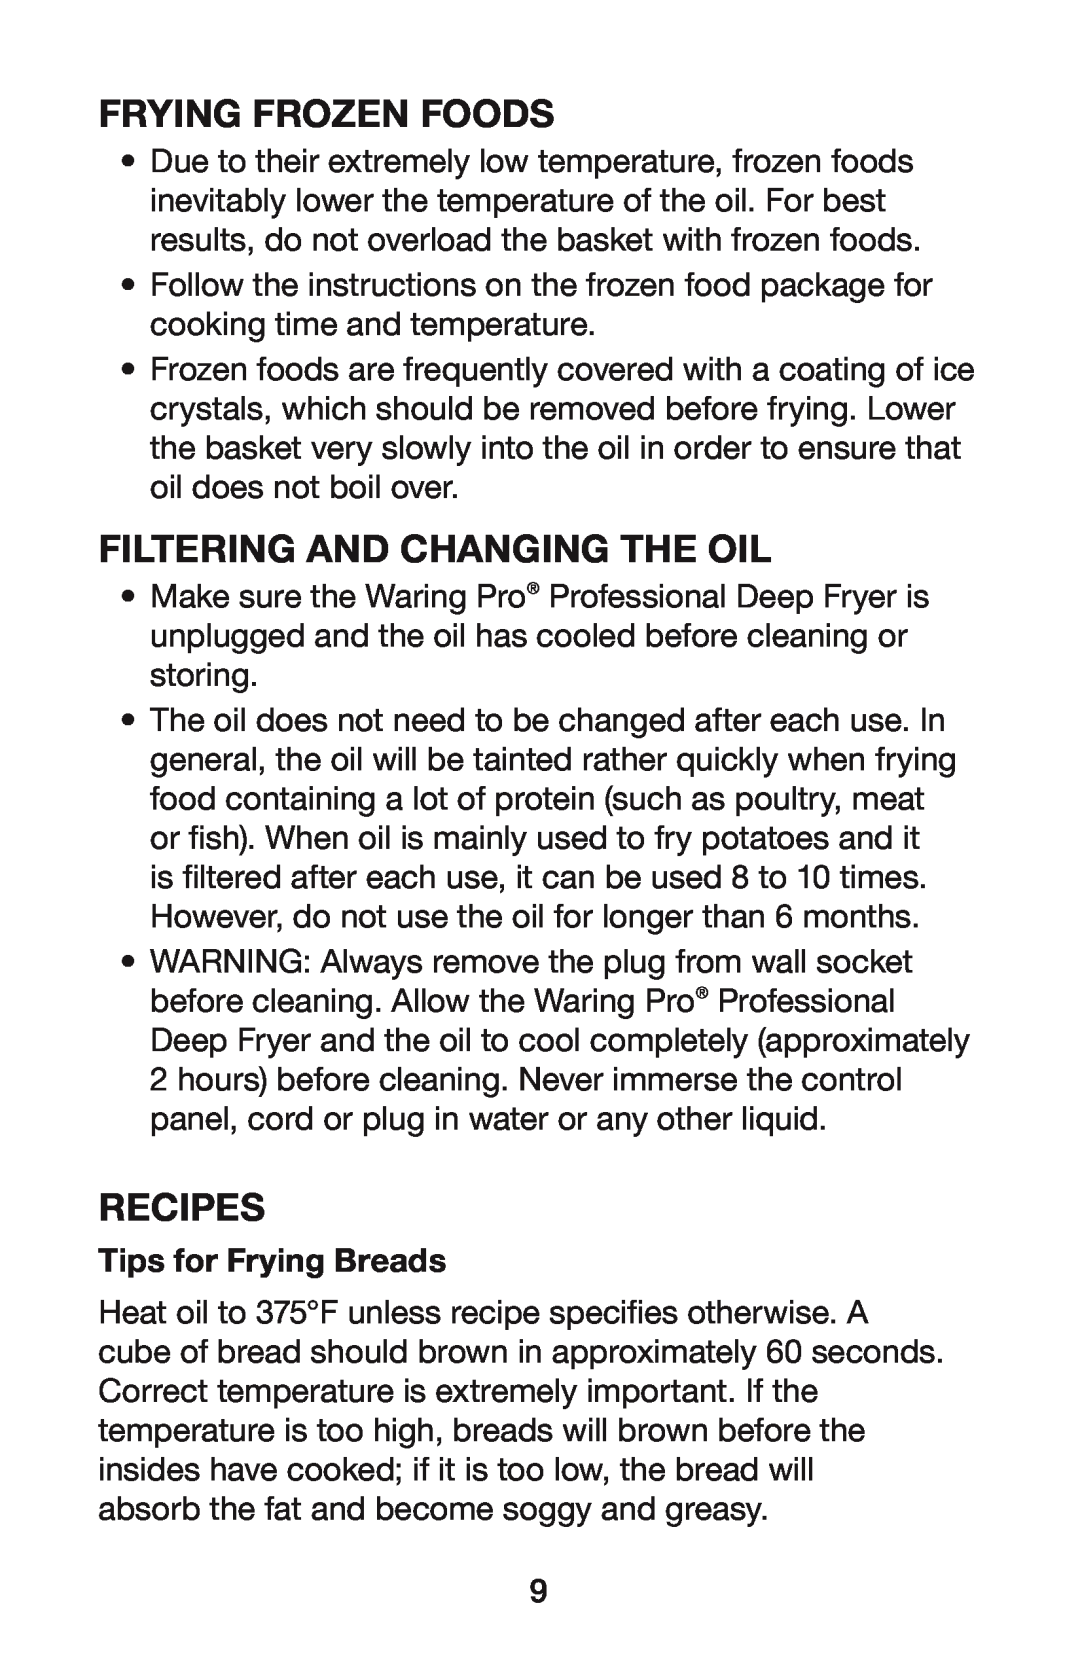 Waring DF55 manual Frying Frozen Foods, Filtering And Changing The Oil, Recipes, Tips for Frying Breads 